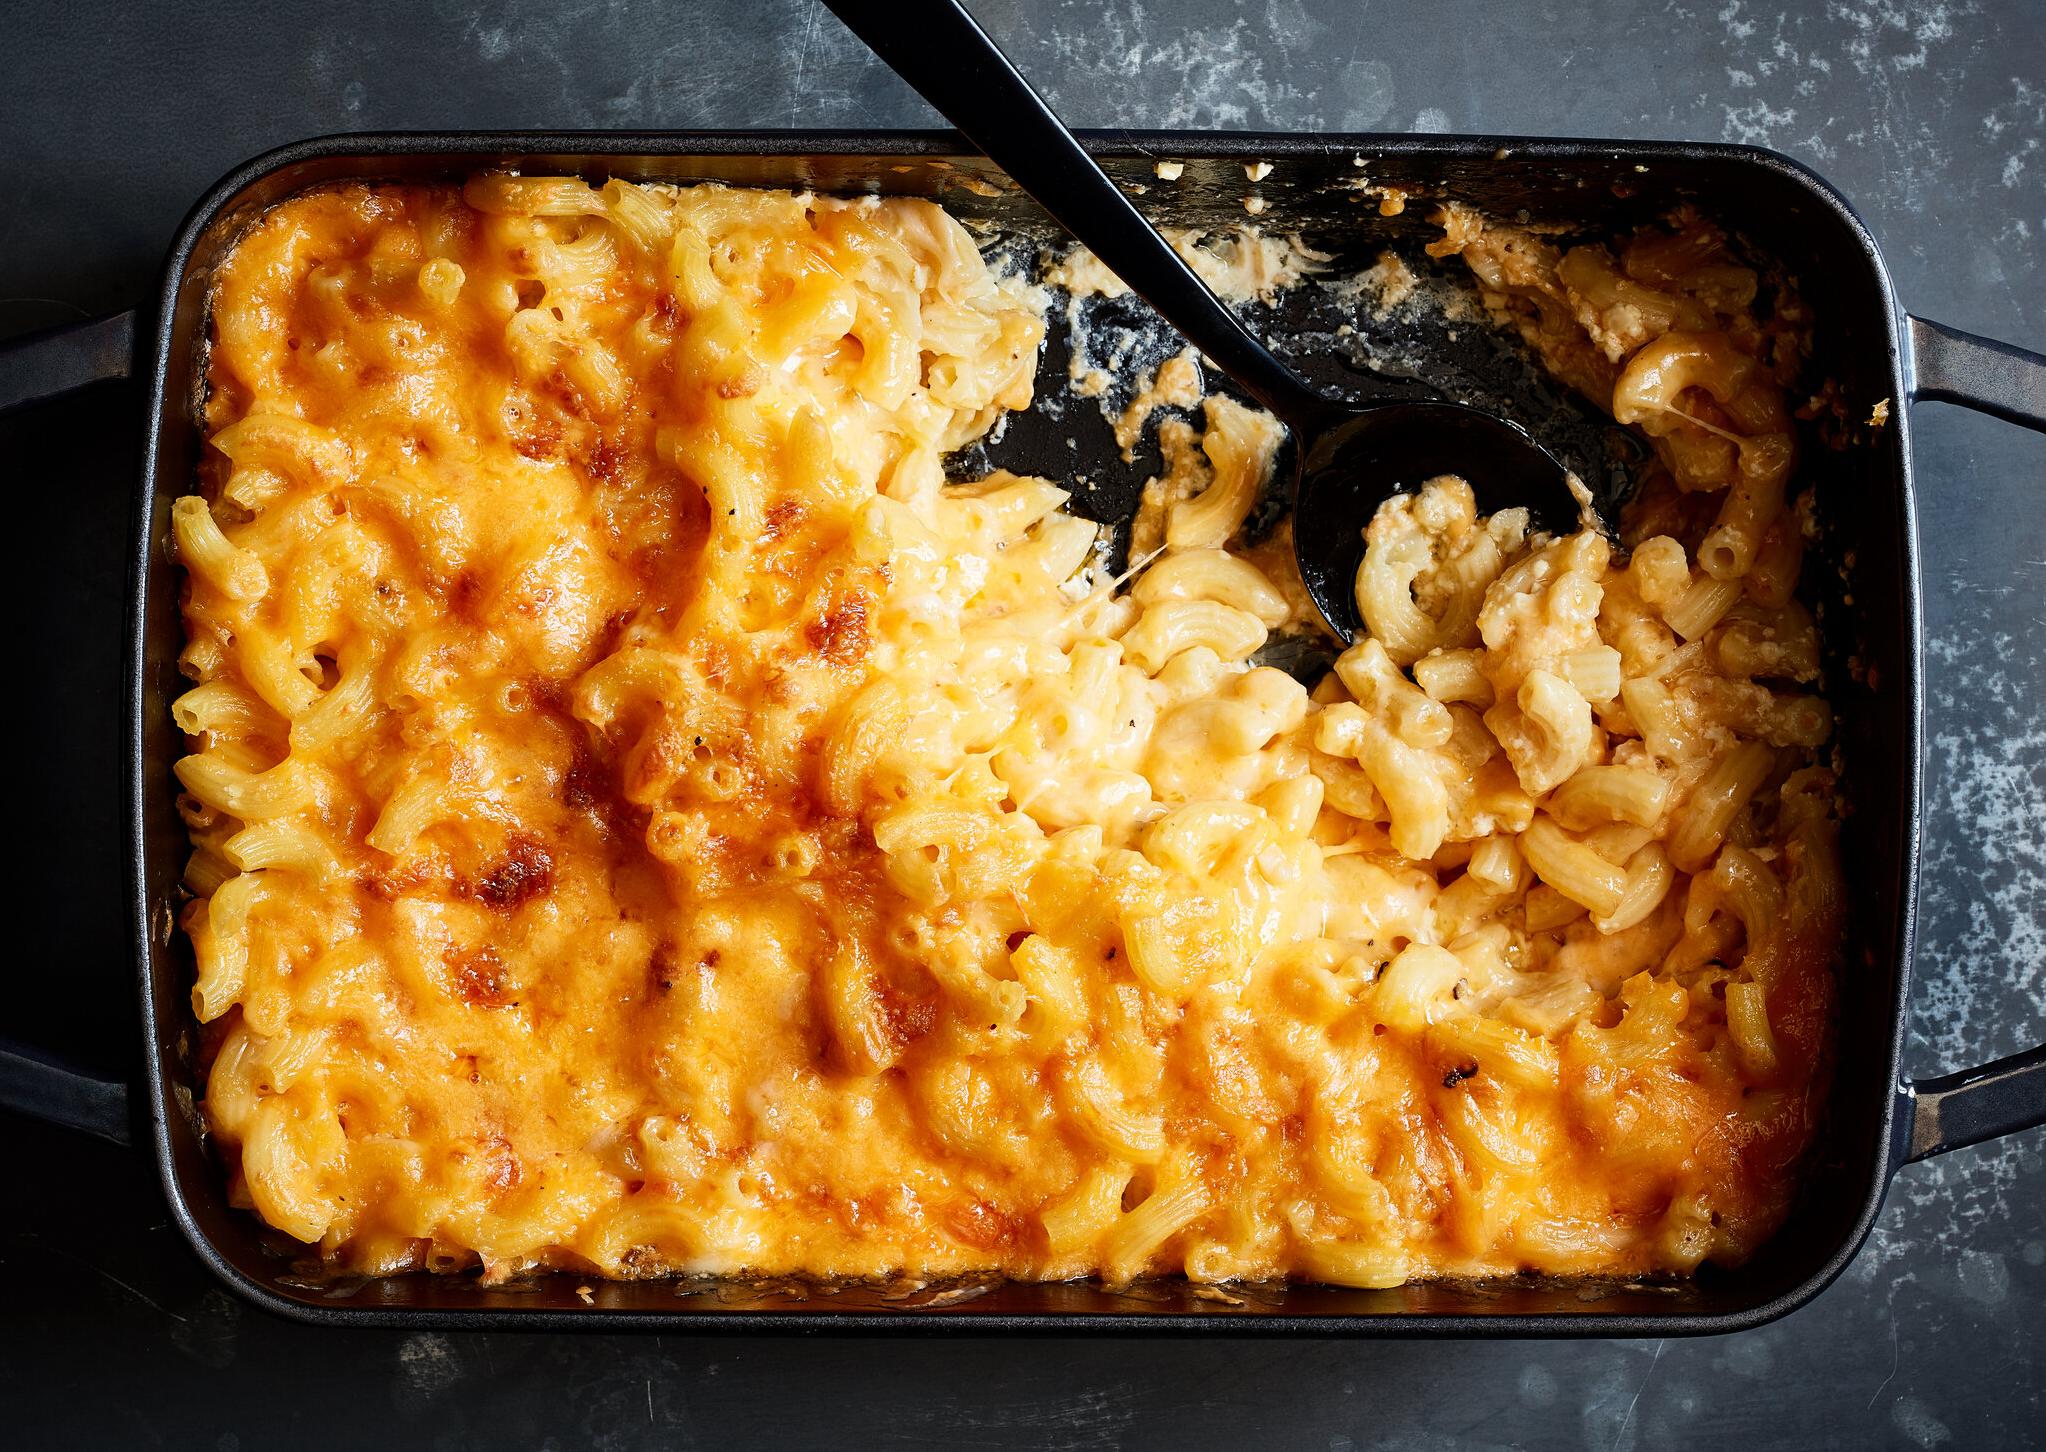  Say goodbye to boring boxed mac and cheese and hello to this homemade, Southern version.